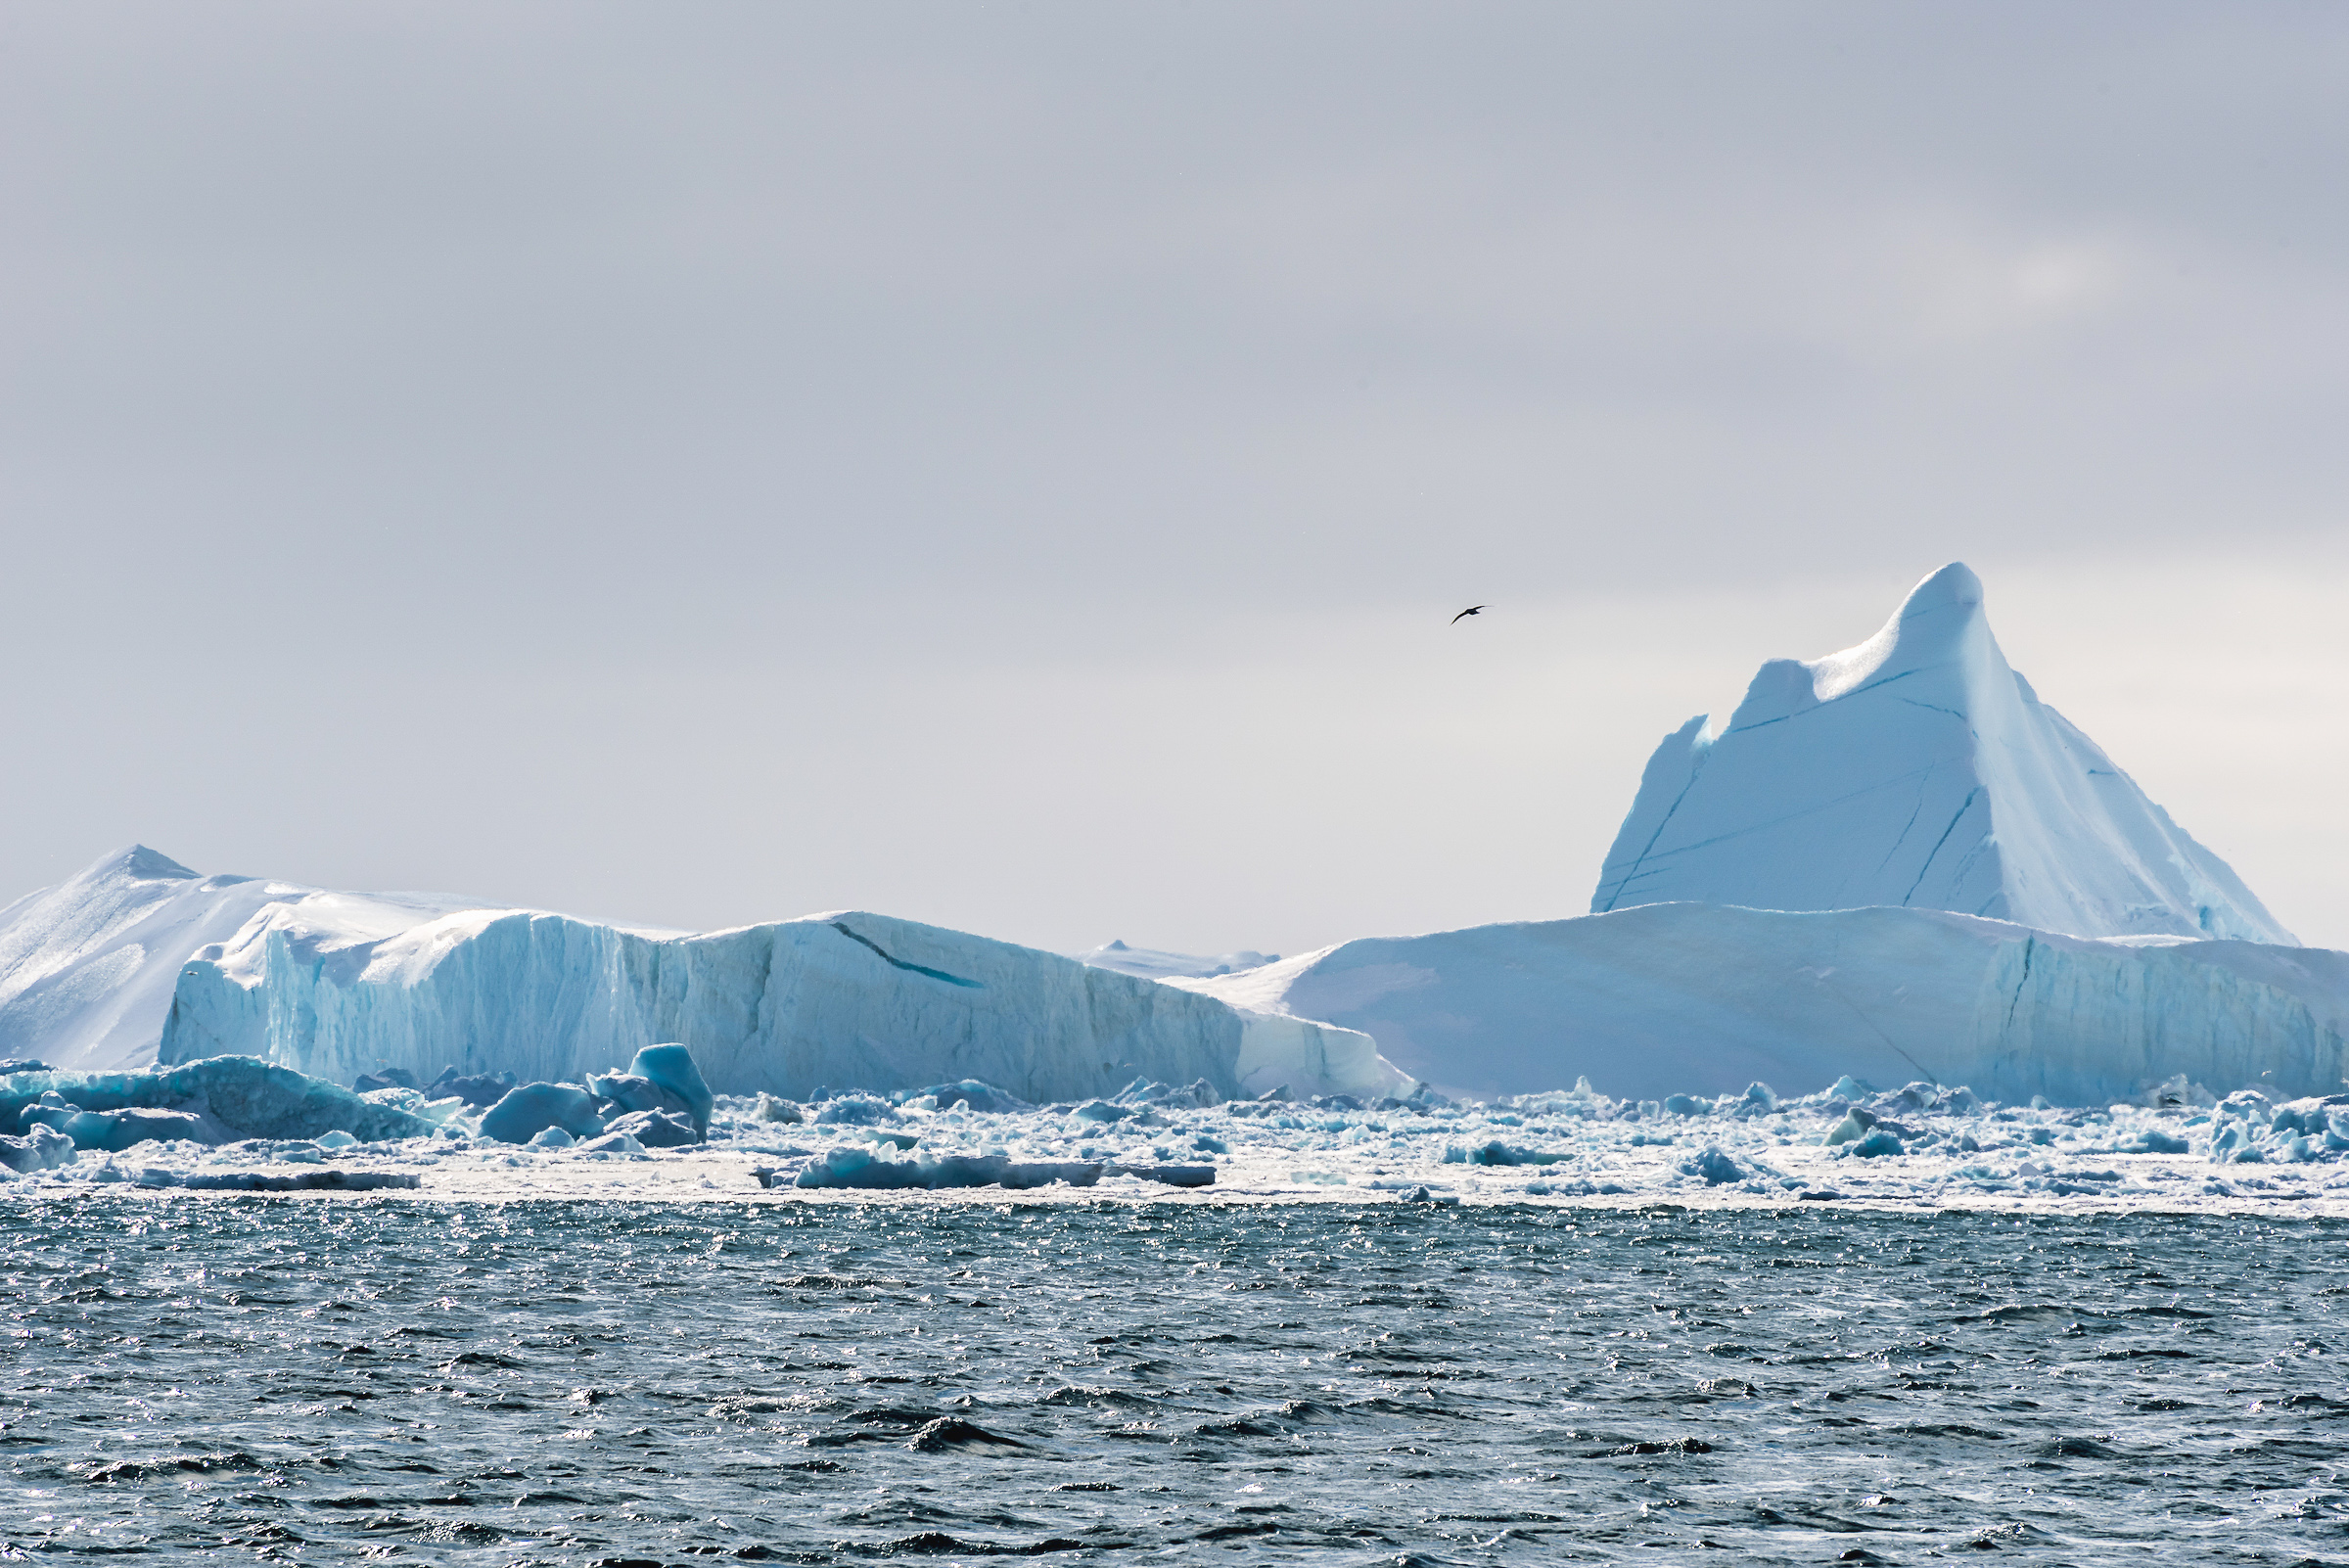 A lone bird flies above a large iceberg in cloudy weather.